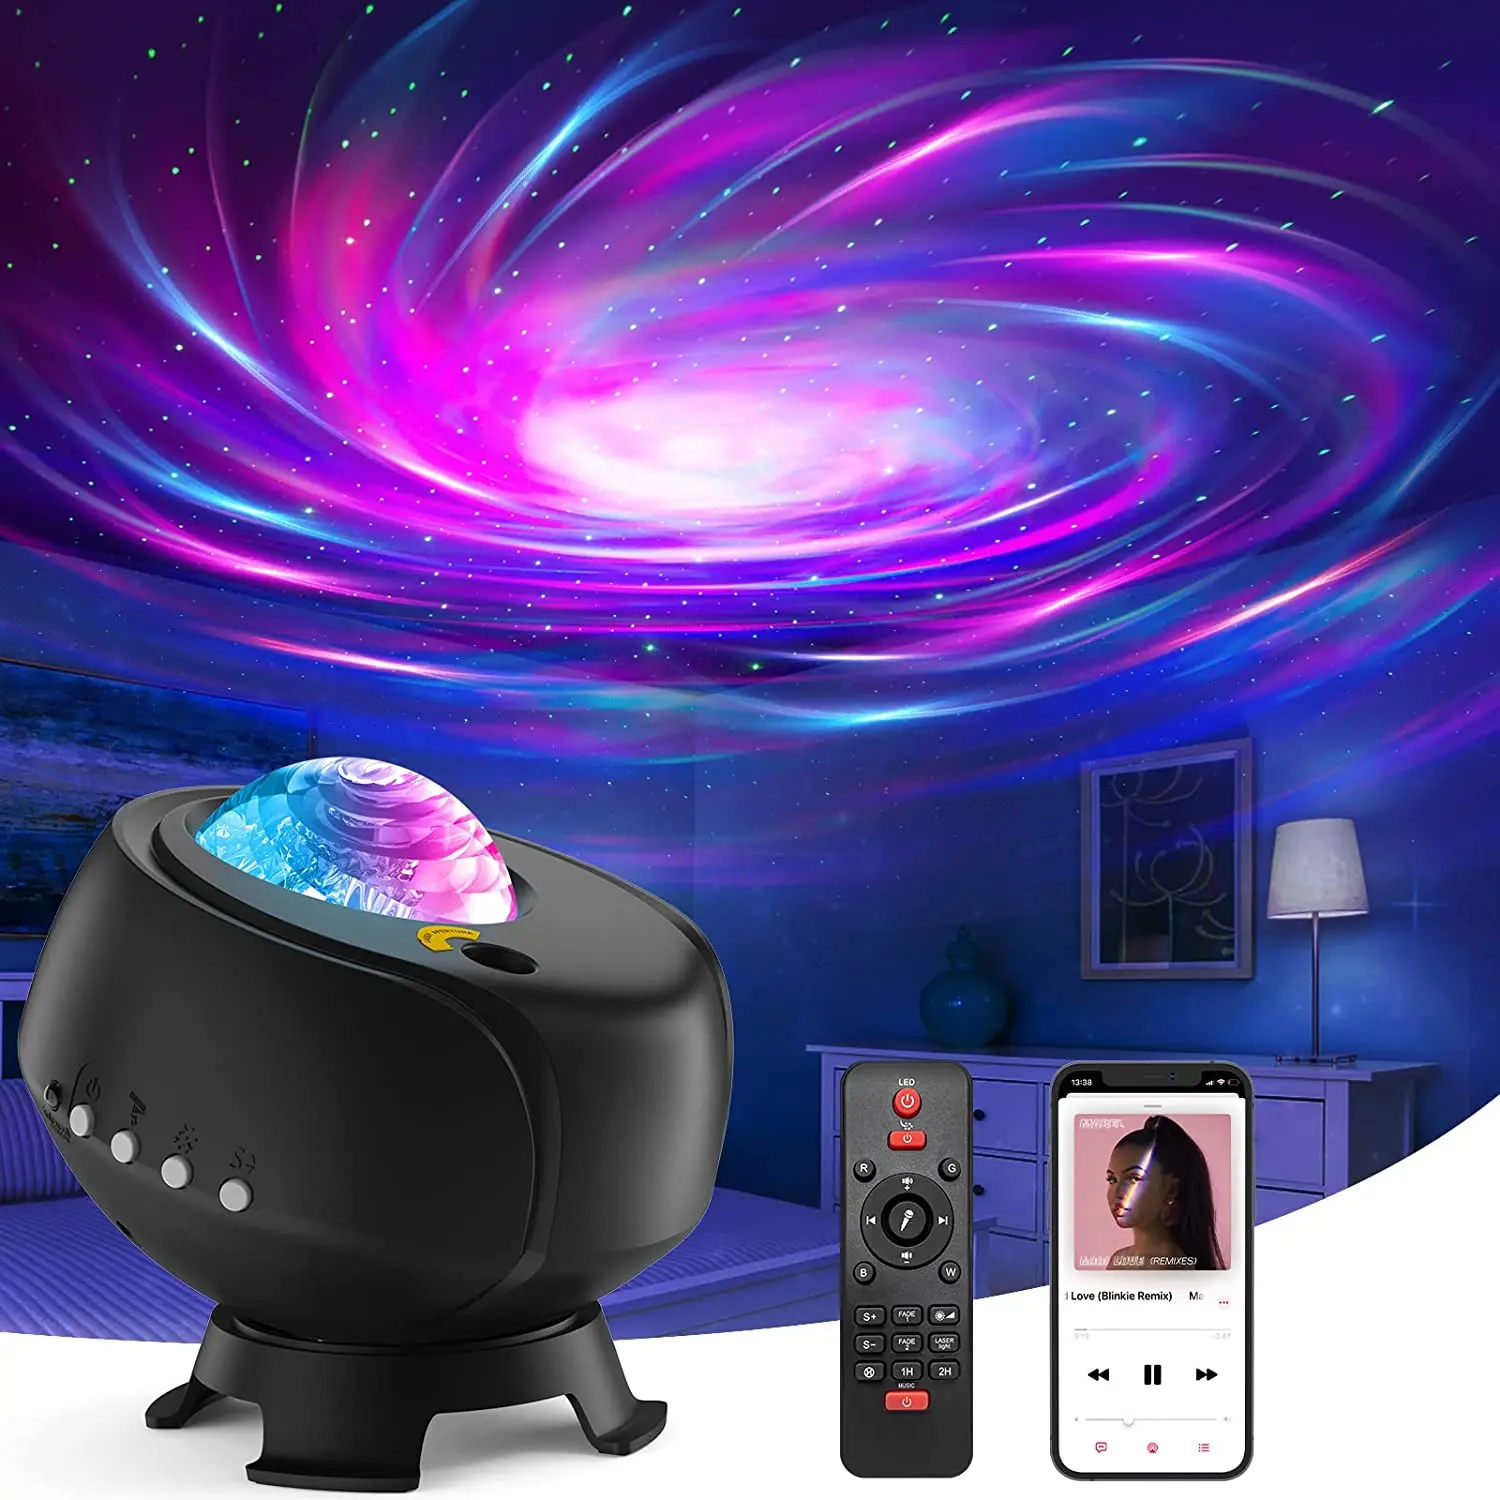 

Galaxy Projector Star Light Projector Night Light with Remote & Timer Bluetooth Speaker for Adults Room Ceiling Kids Gifts Decor